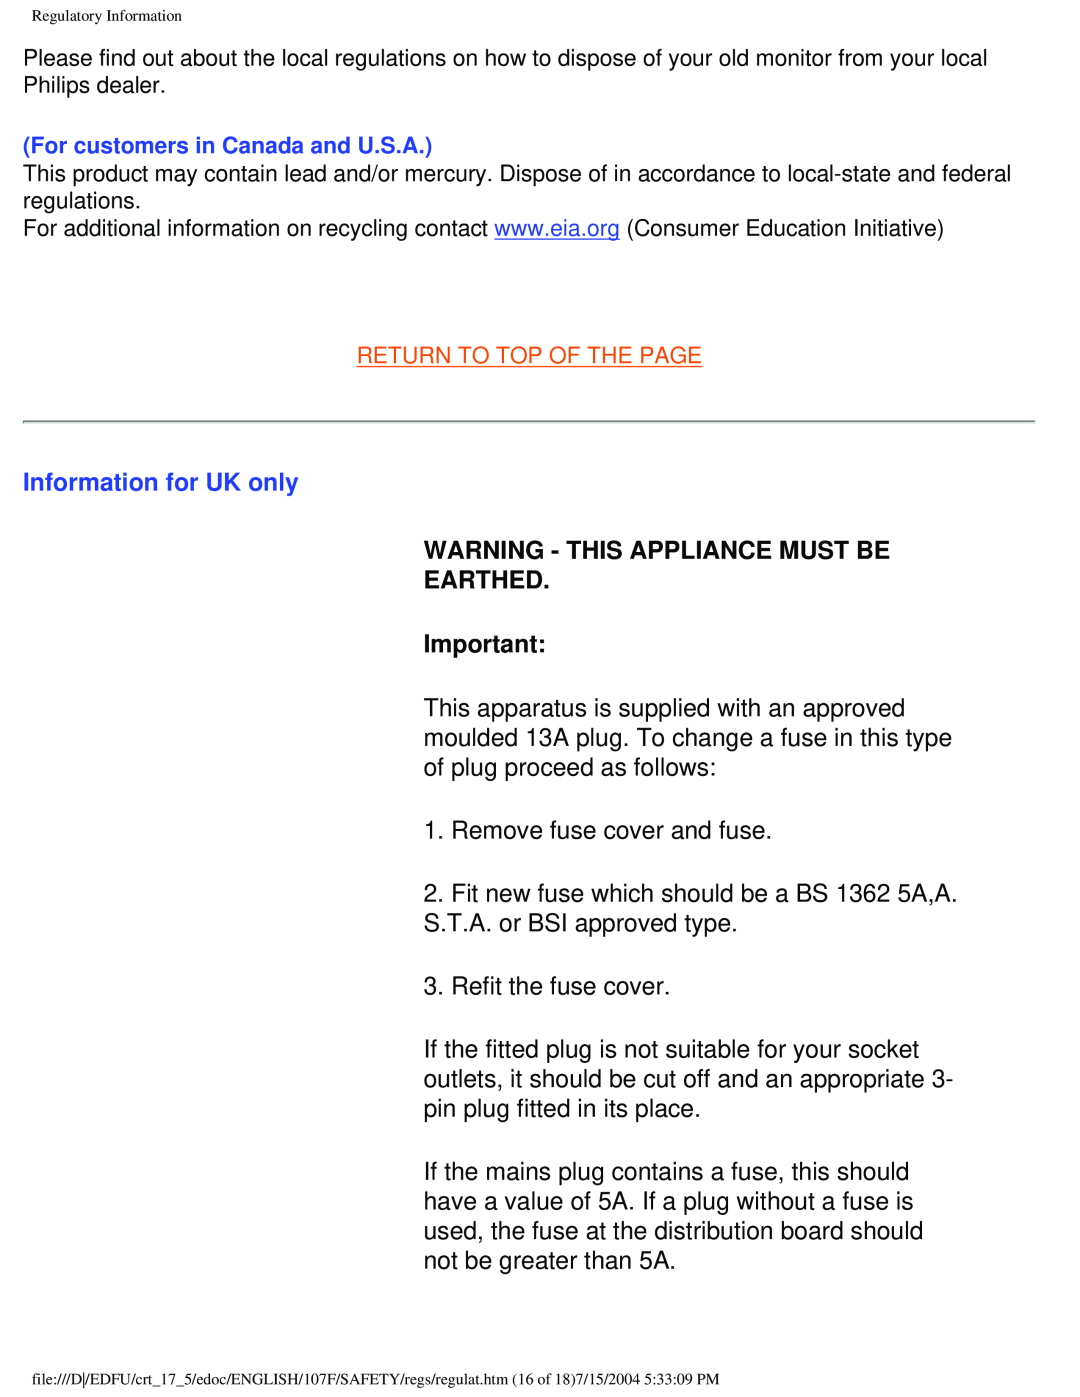 Philips 107F5, 109F5, 107S5, 107T5, 109B5, 107E5 user manual Information for UK only, Warning - This Appliance Must Be Earthed 